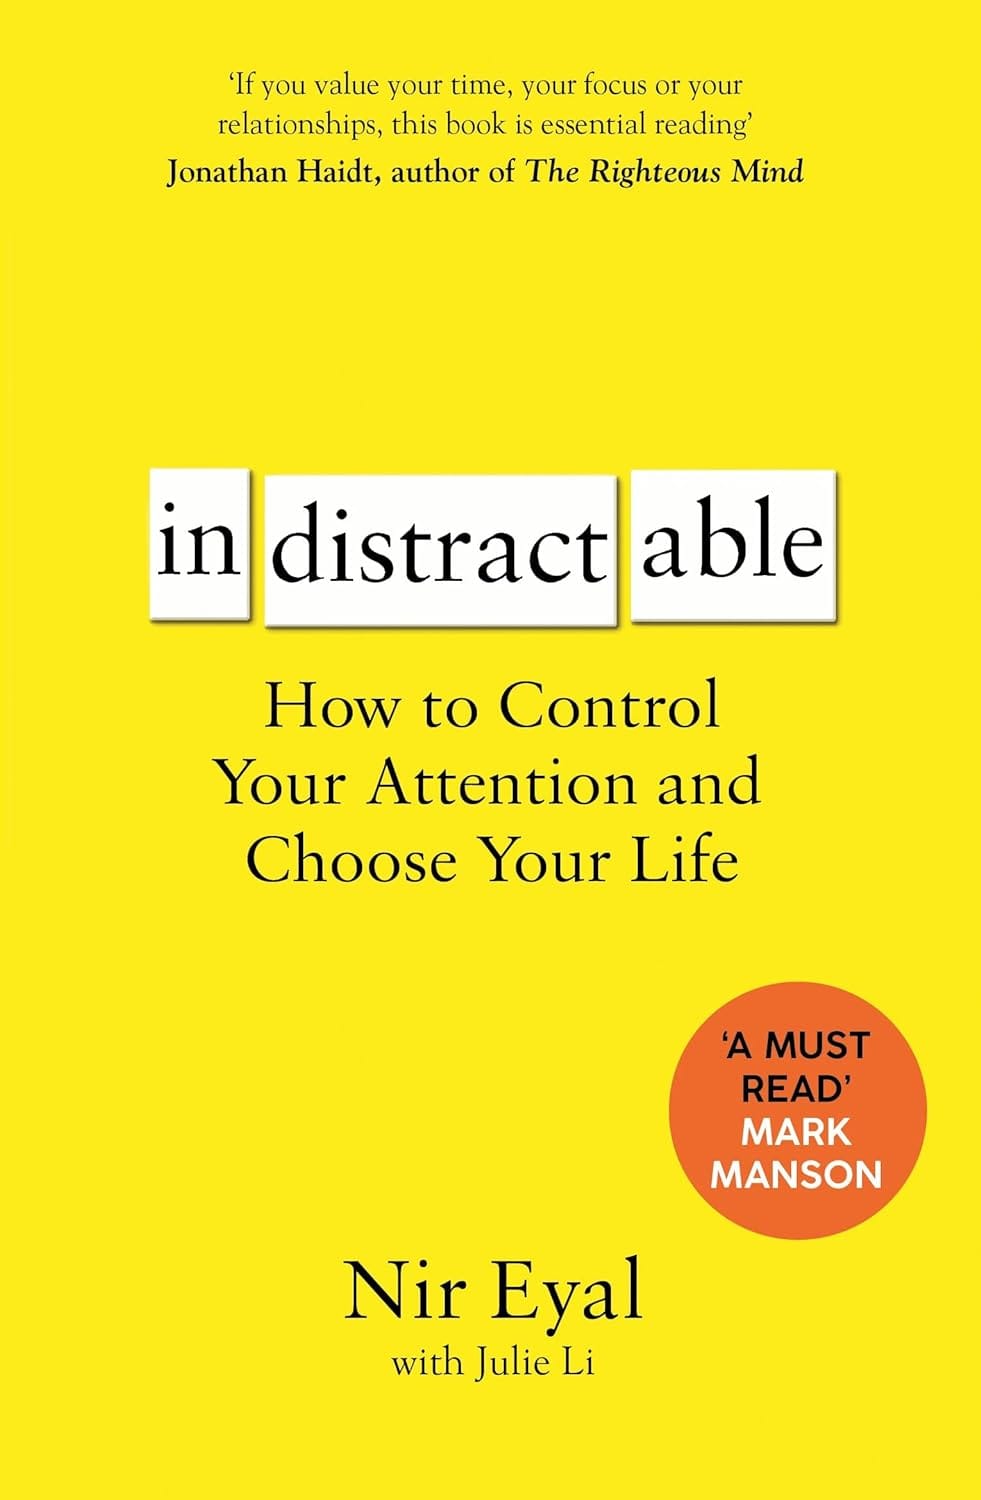 10 Books to Help You Avoid Distractions While Working from Home